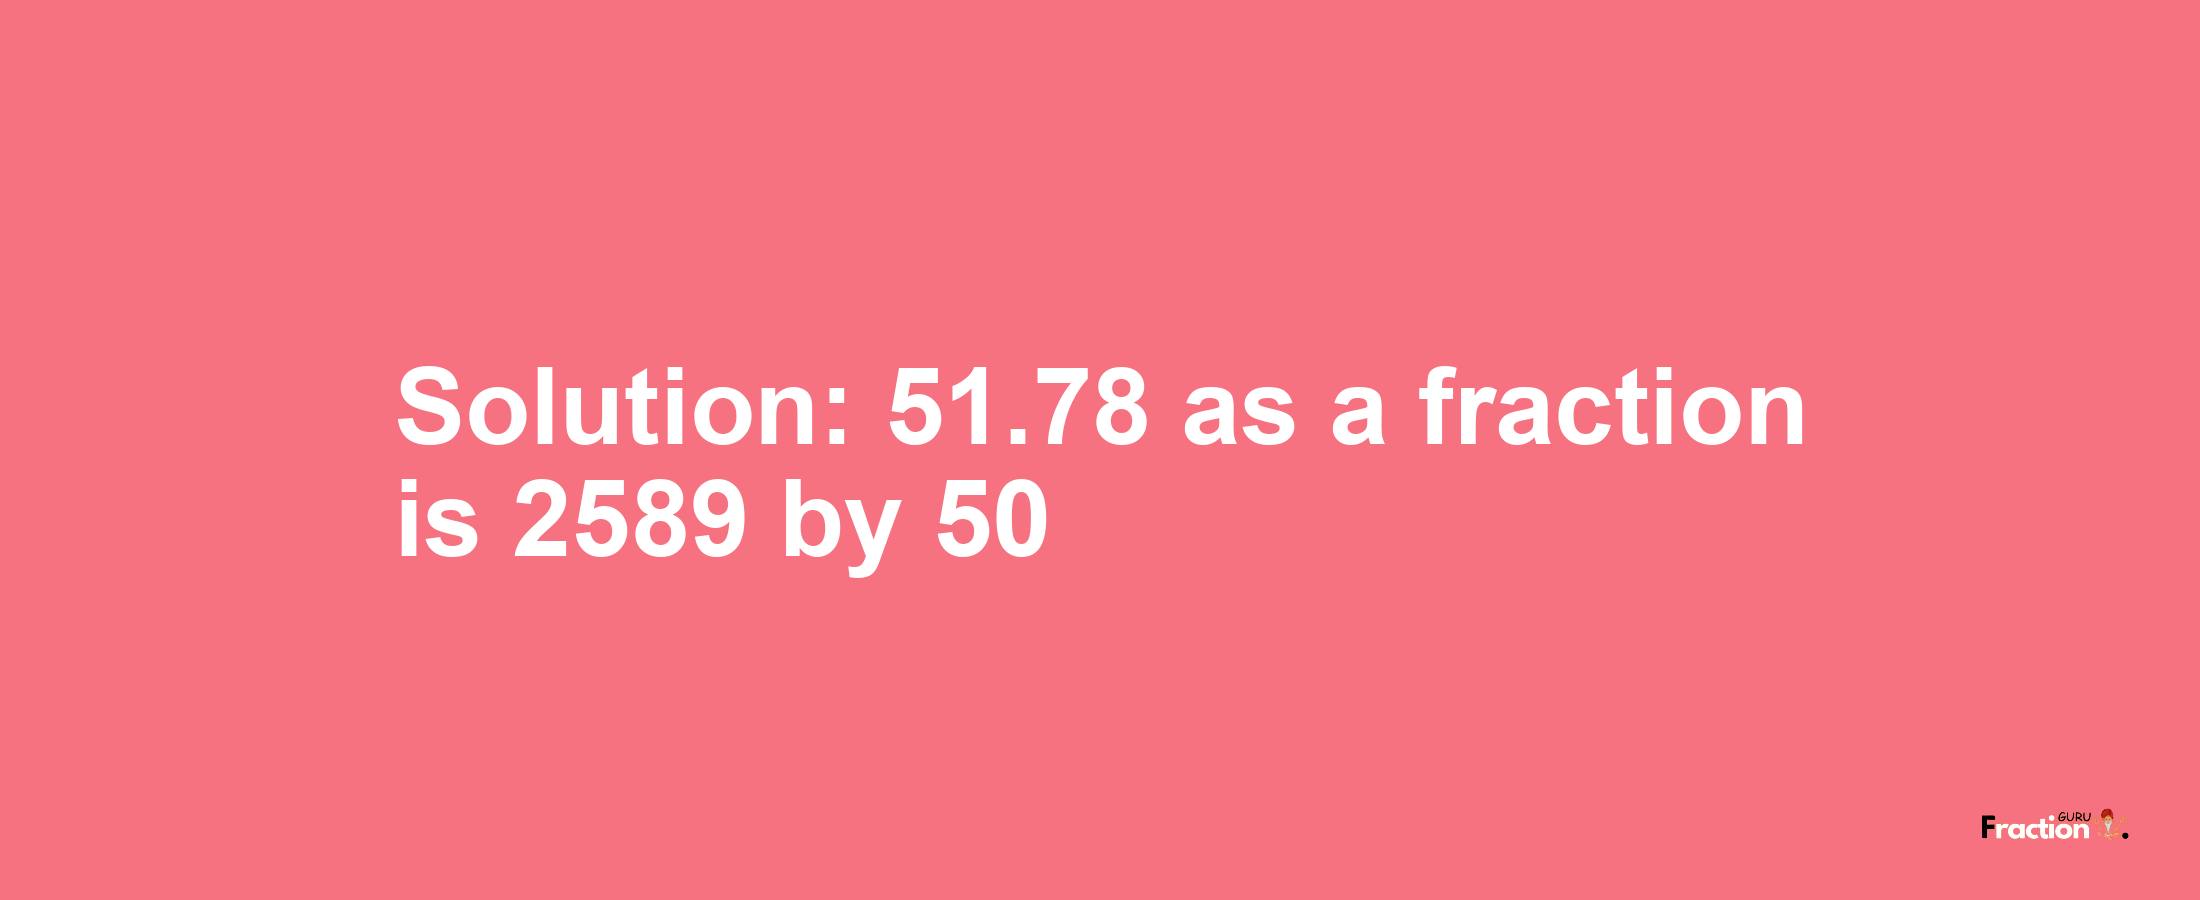 Solution:51.78 as a fraction is 2589/50